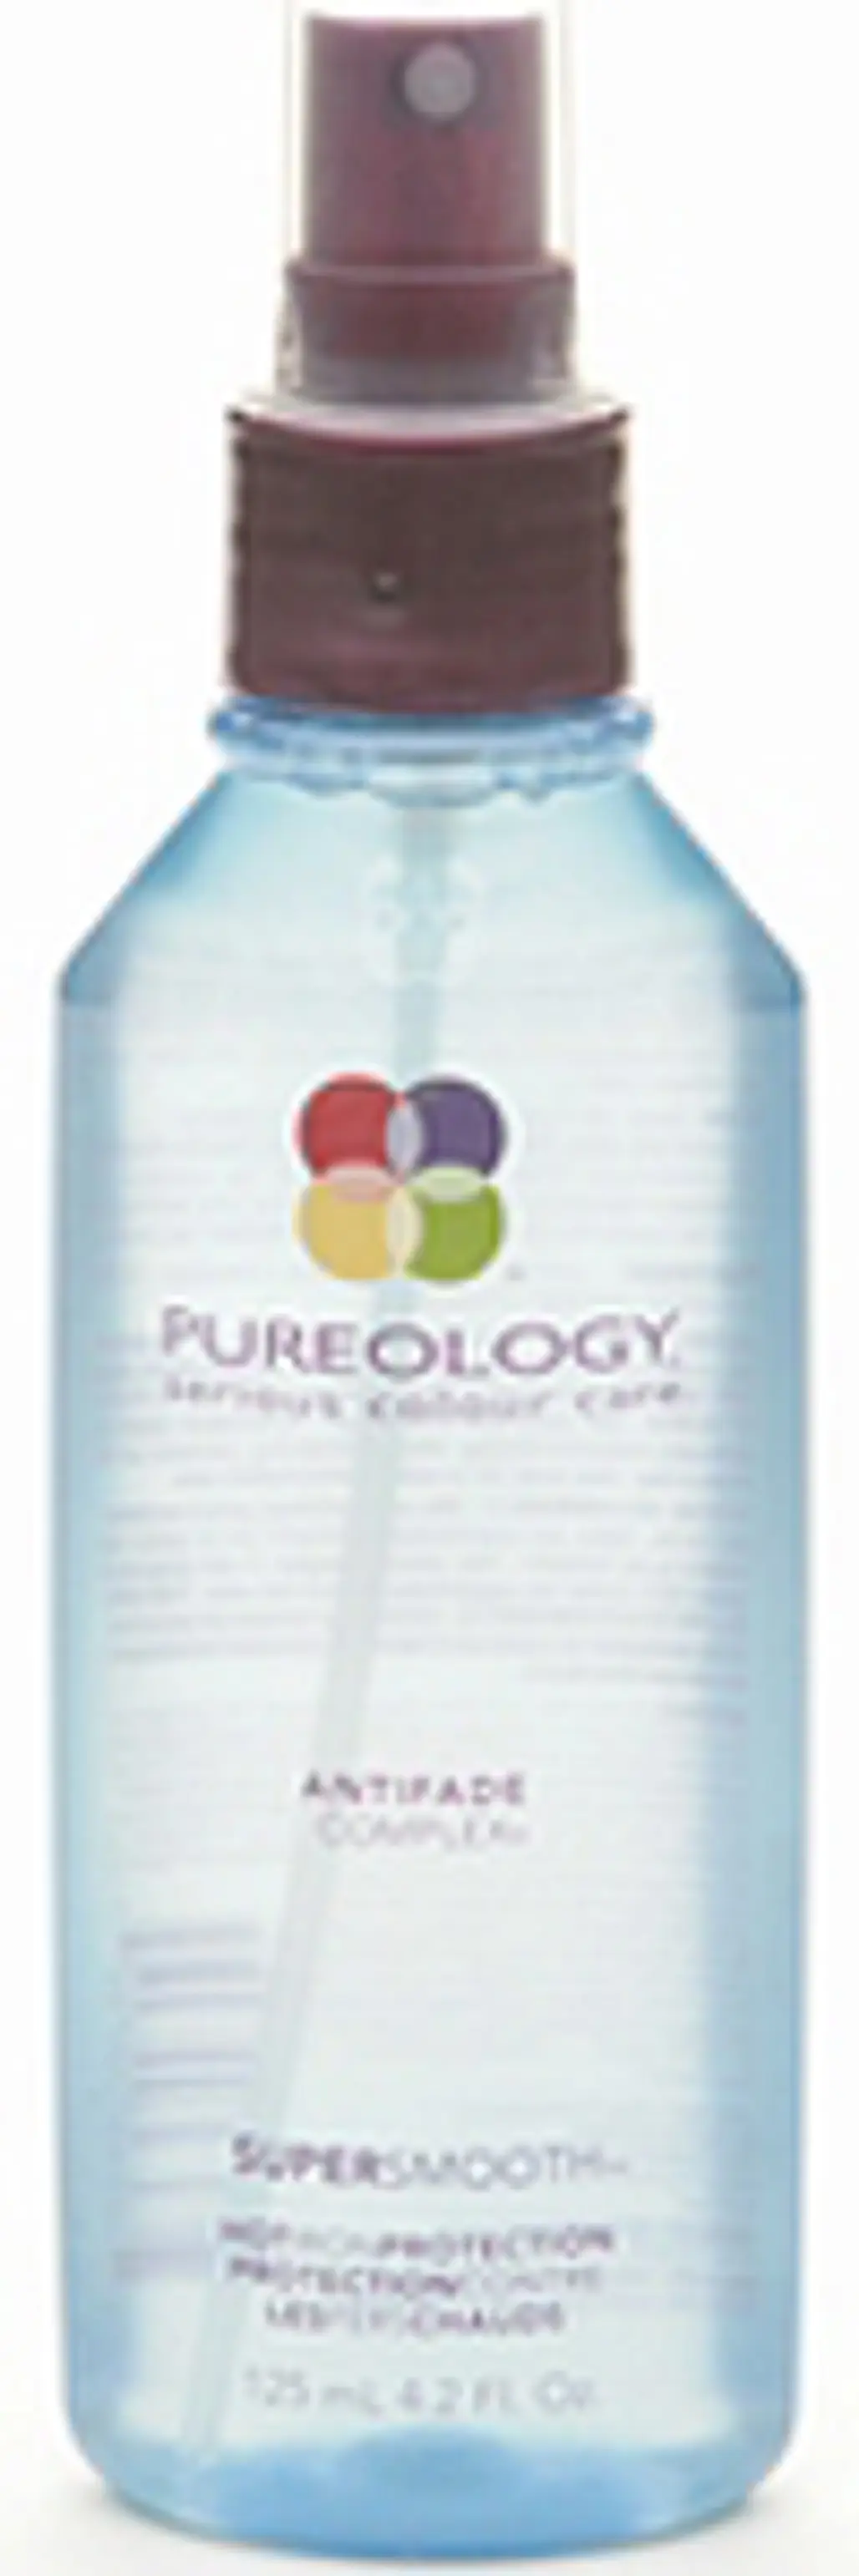 Pureology by Pureology Hot Iron Protection